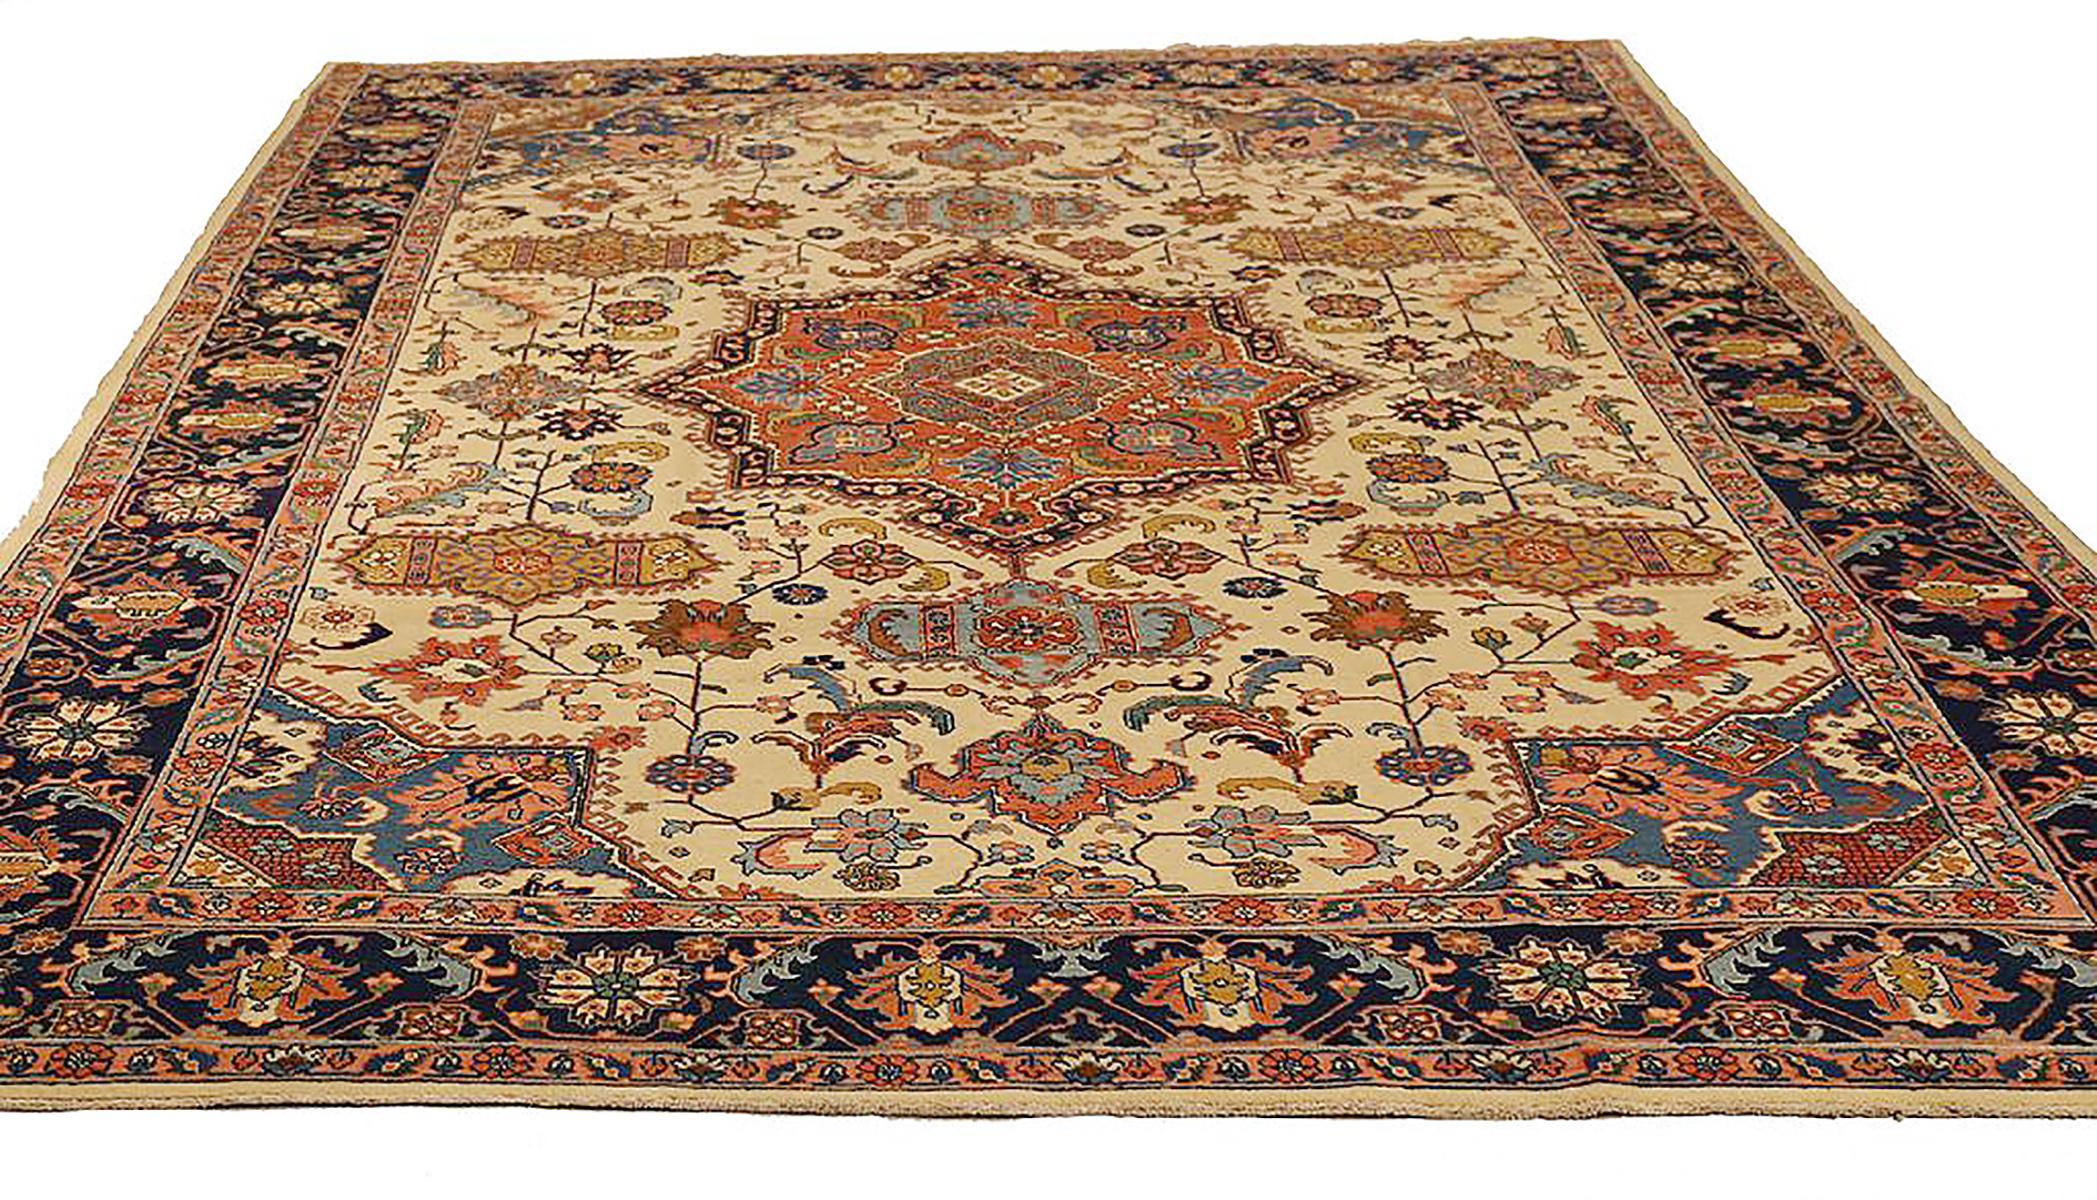 Antique Persian rug handwoven from the finest sheep’s wool and colored with all-natural vegetable dyes that are safe for humans and pets. It’s a traditional Tabriz weaving featuring a lovely ensemble of floral designs highlighted by a central